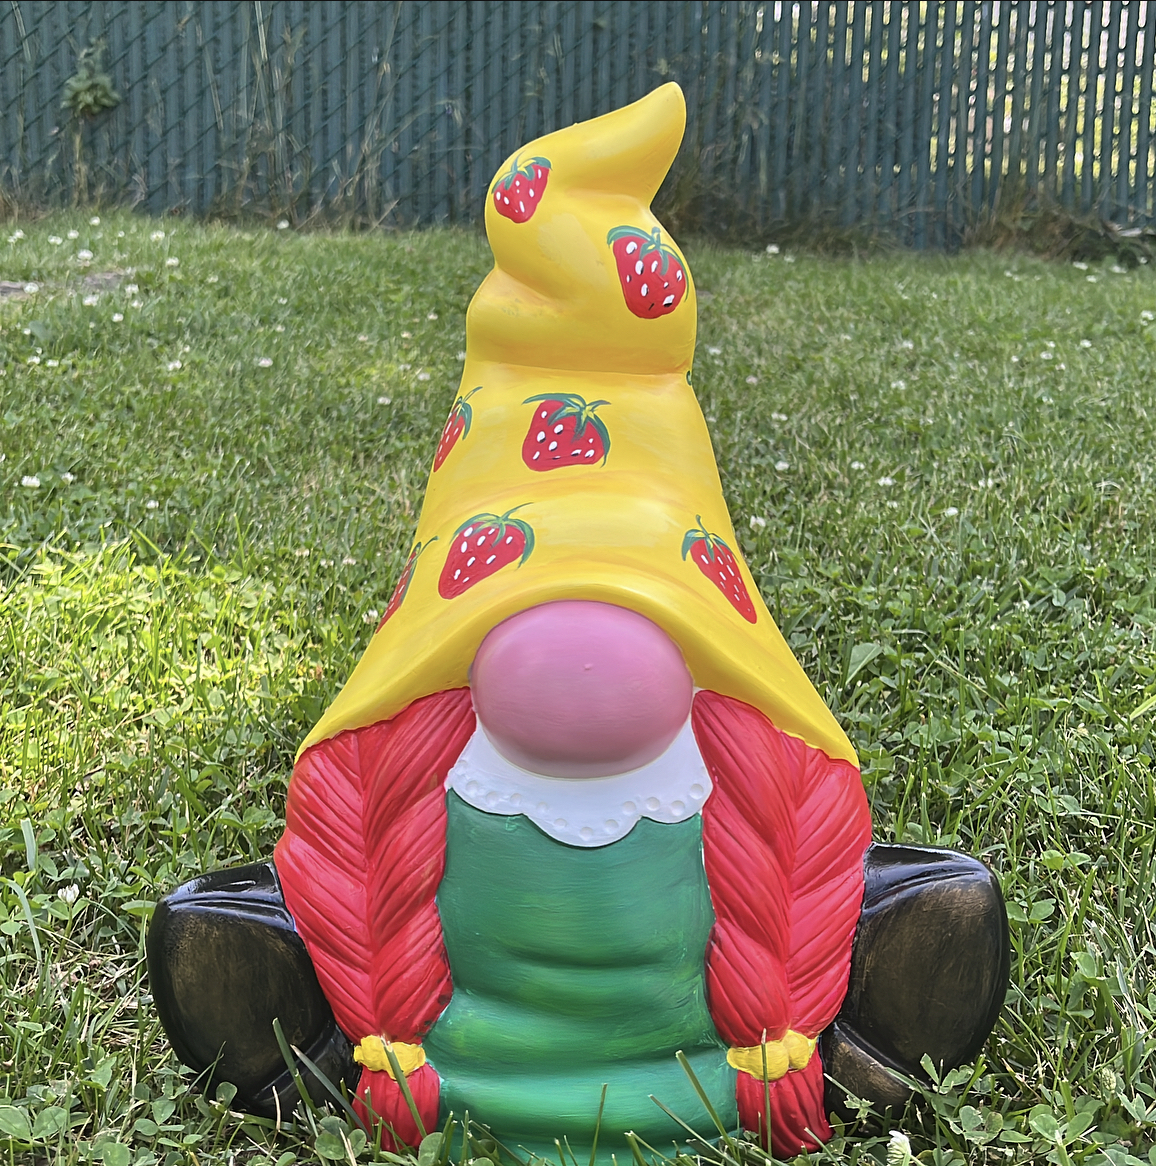 A 12 ceramic Customizable  female gnome  experience project by Yaymaker